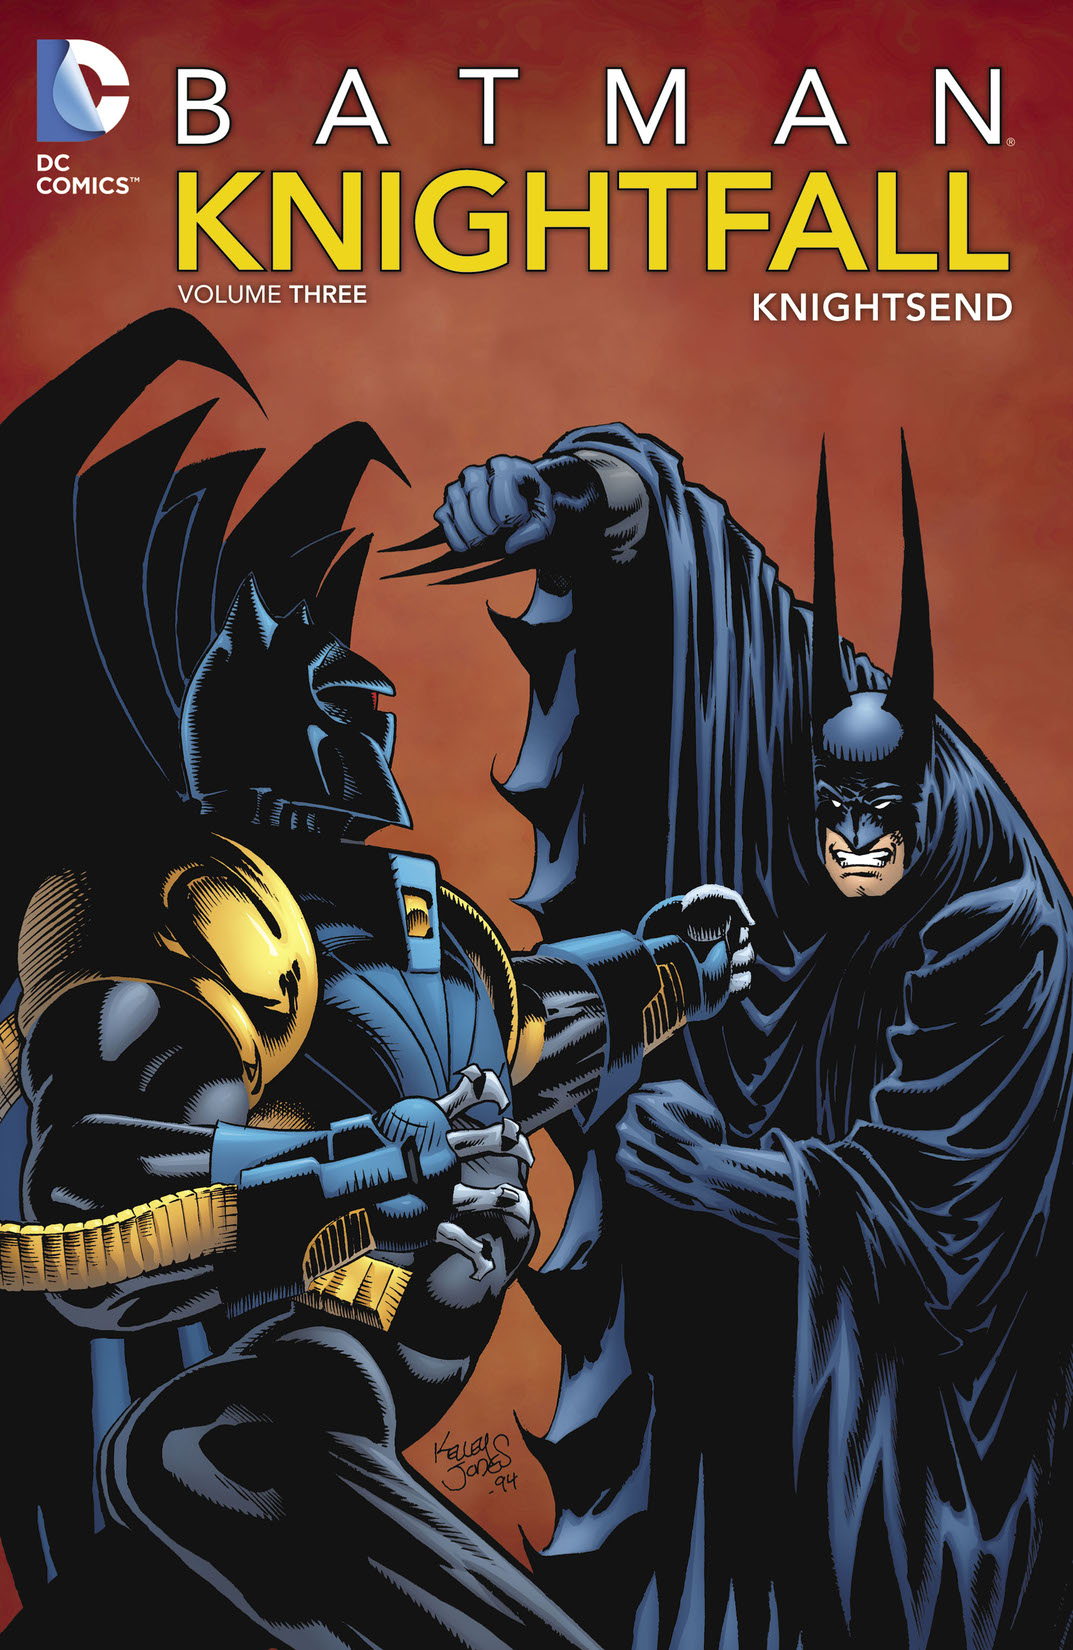 Batman: Knightfall Vol. 3: Knightsend preview images